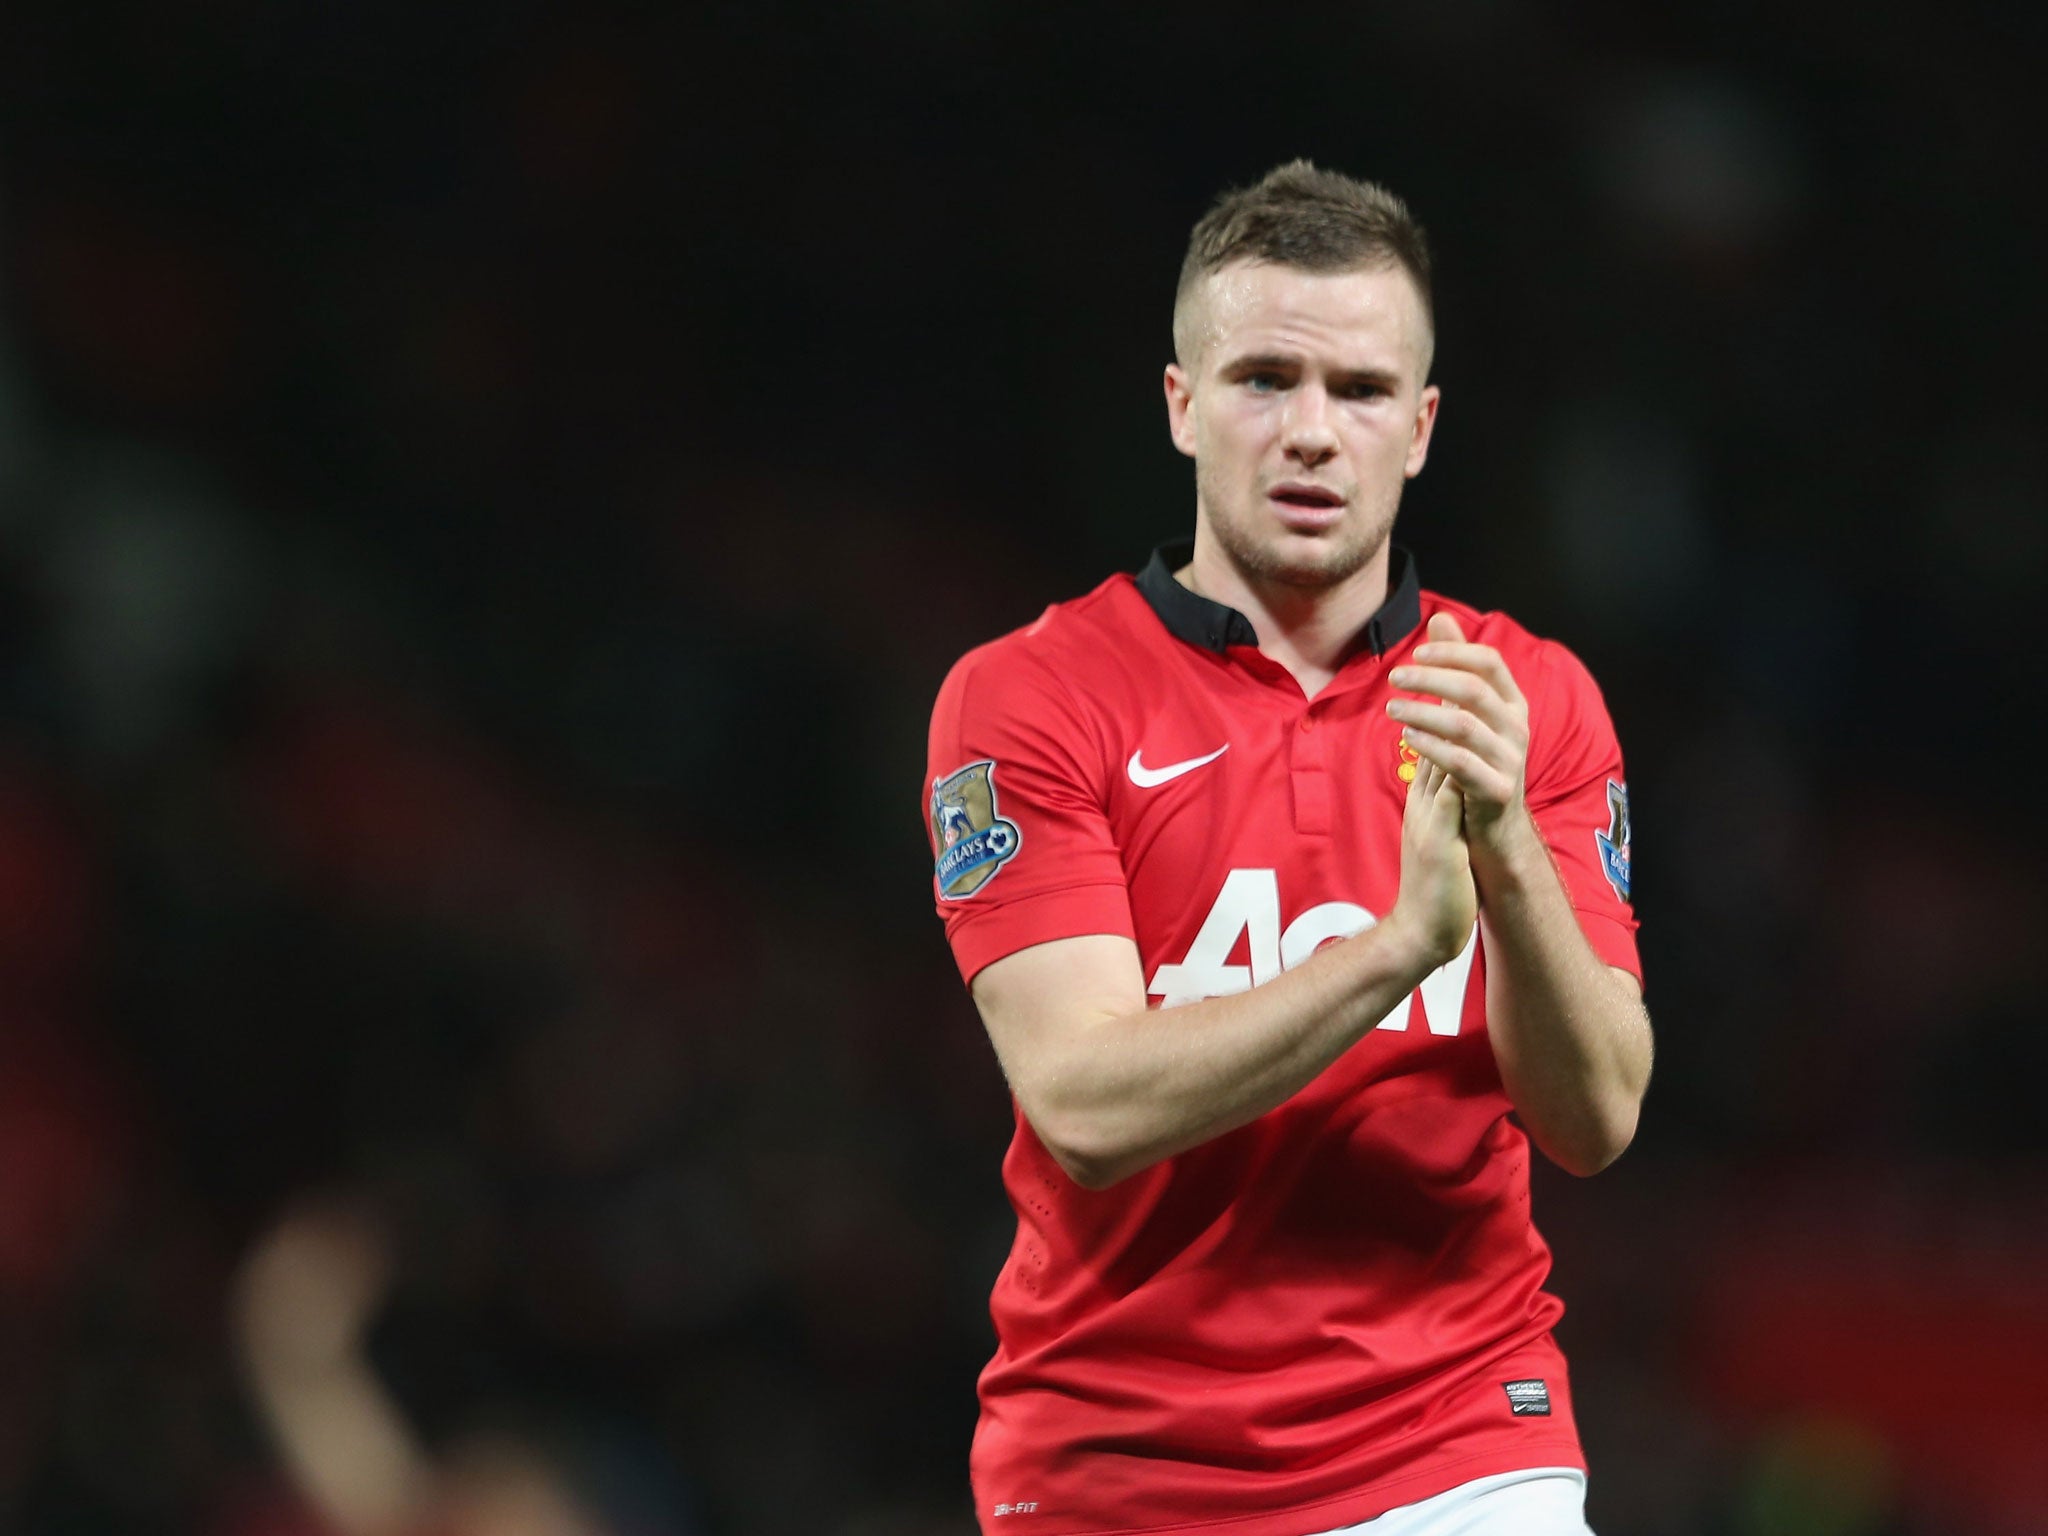 Tom Cleverley appears to have closed down his Twitter account